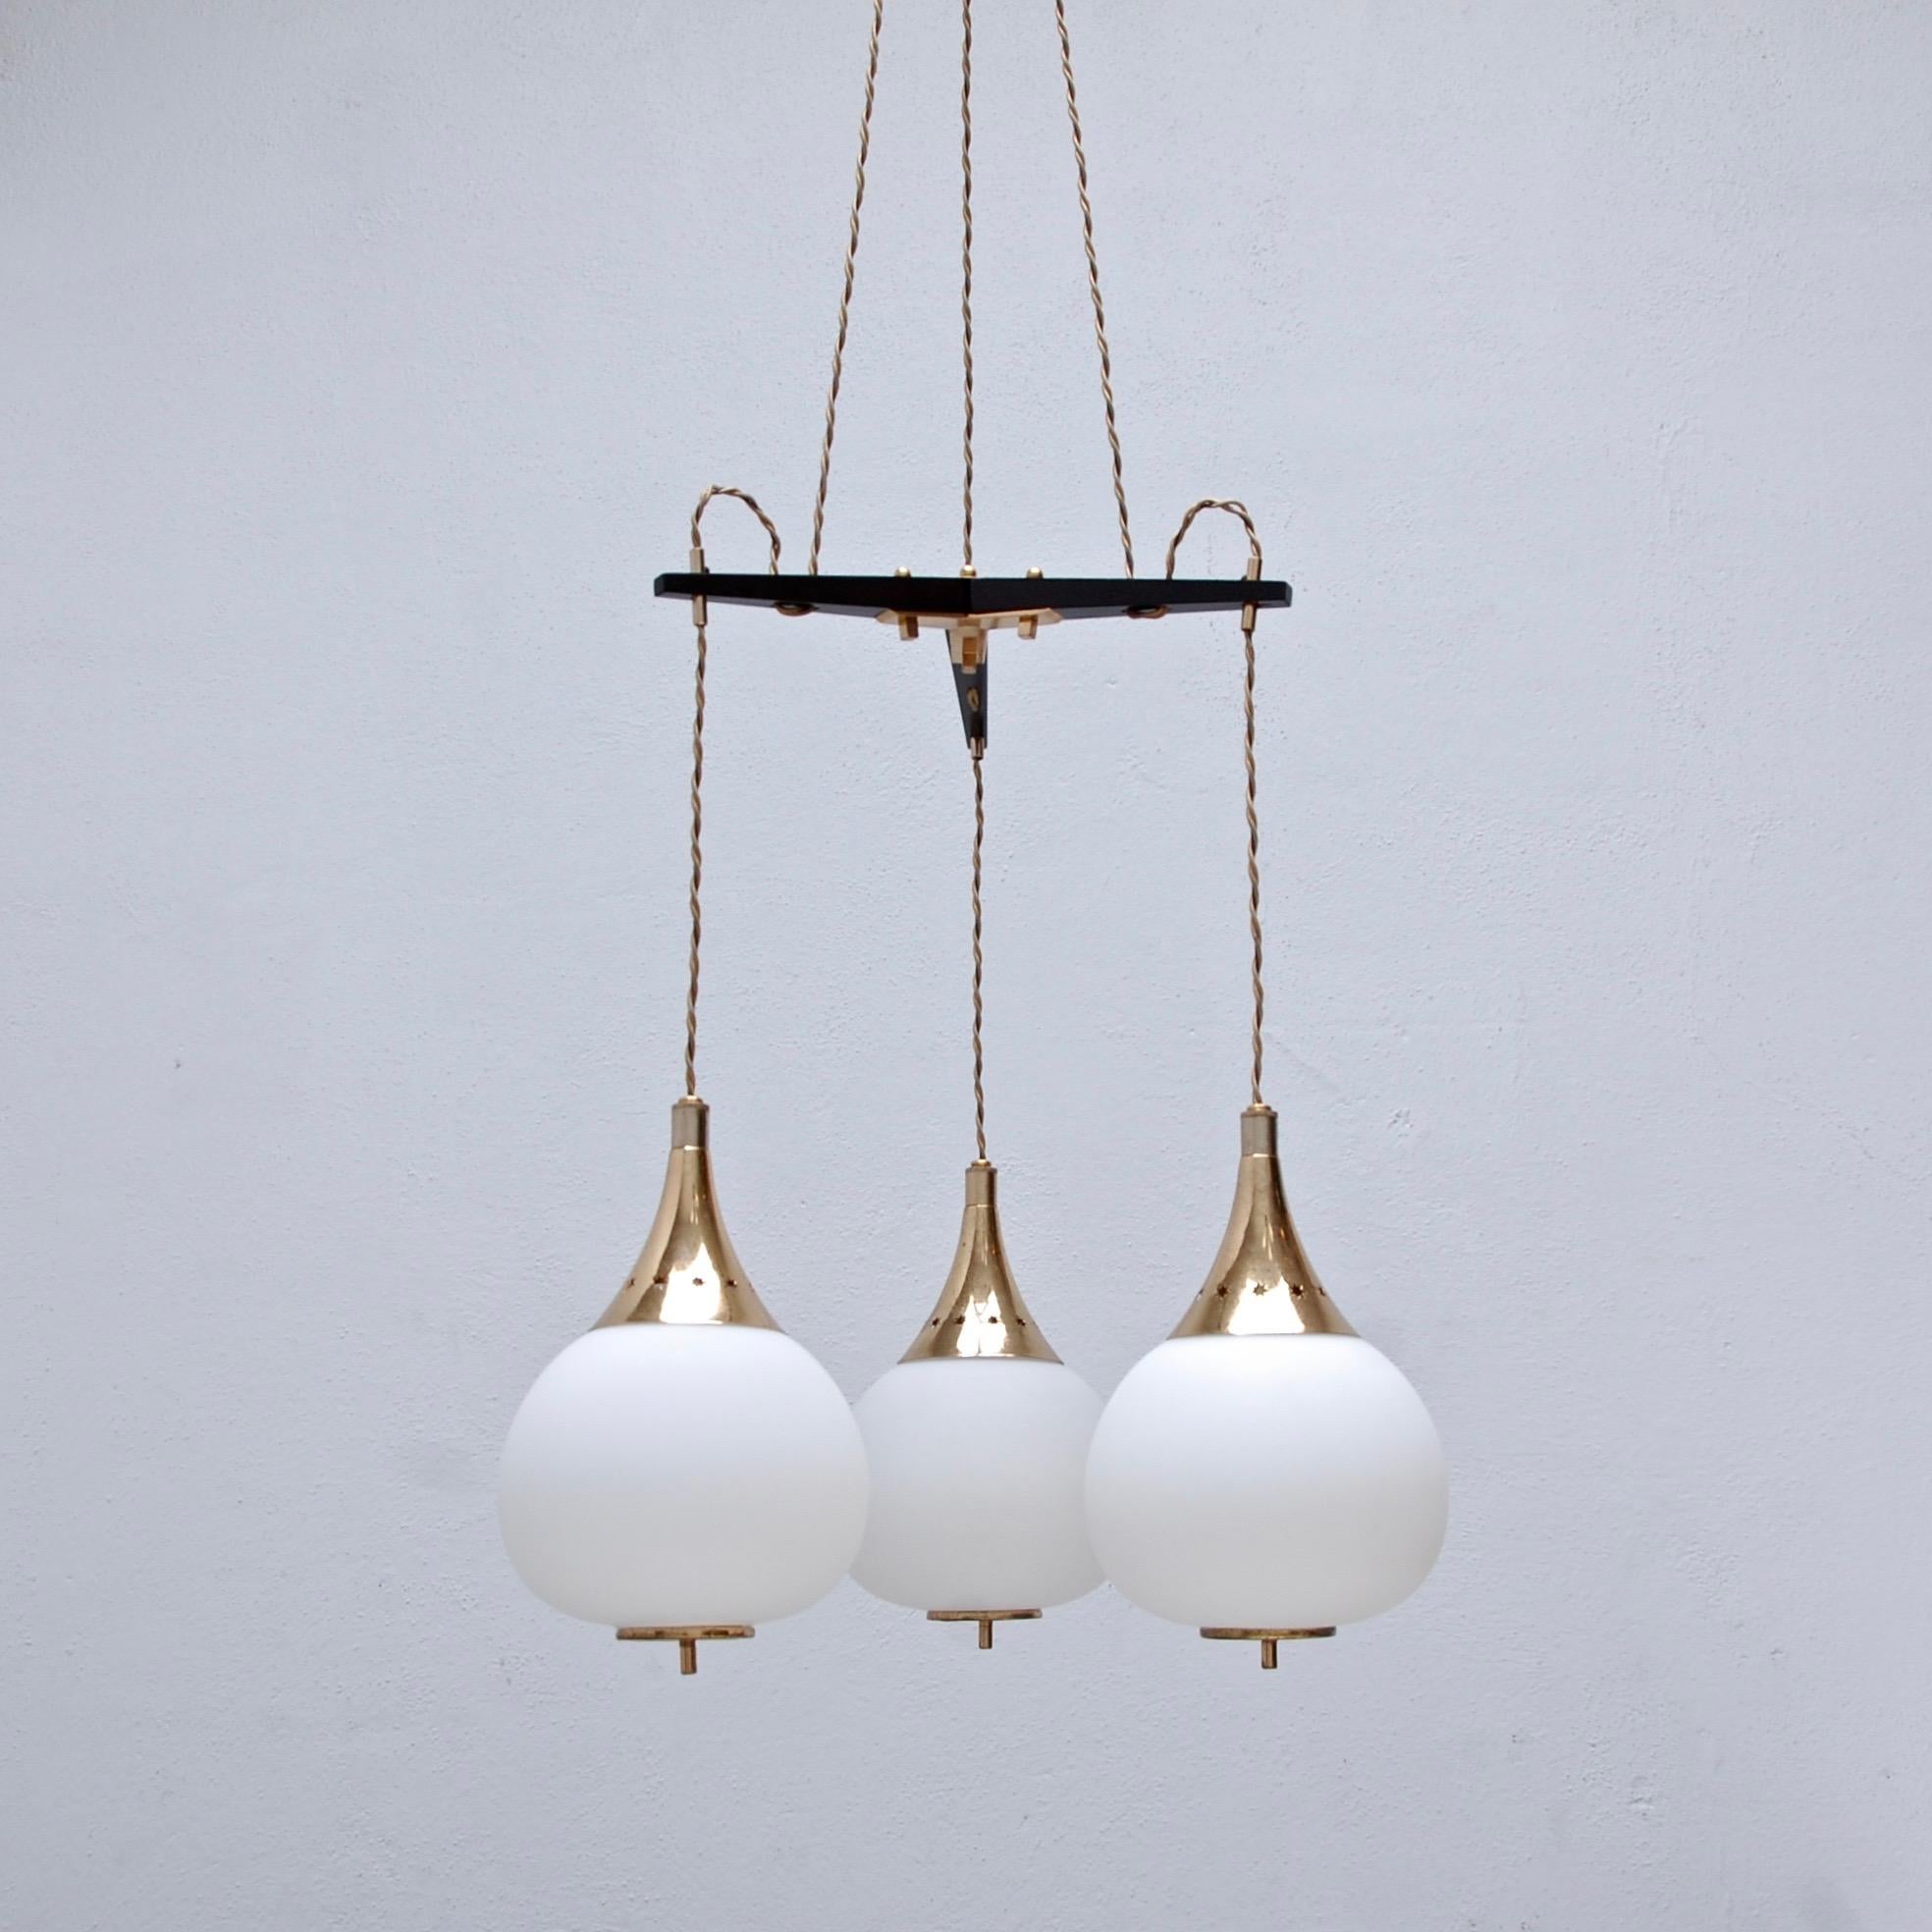 (2) iconic 1950 pendant chandeliers by Stilnovo of Italy. Each pendant has its original aged brass finish, (3) glass globe shades and wood centre spacer. Wired for use in the US. Current OAD can be adjusted upon request. Single E12 candelabra based